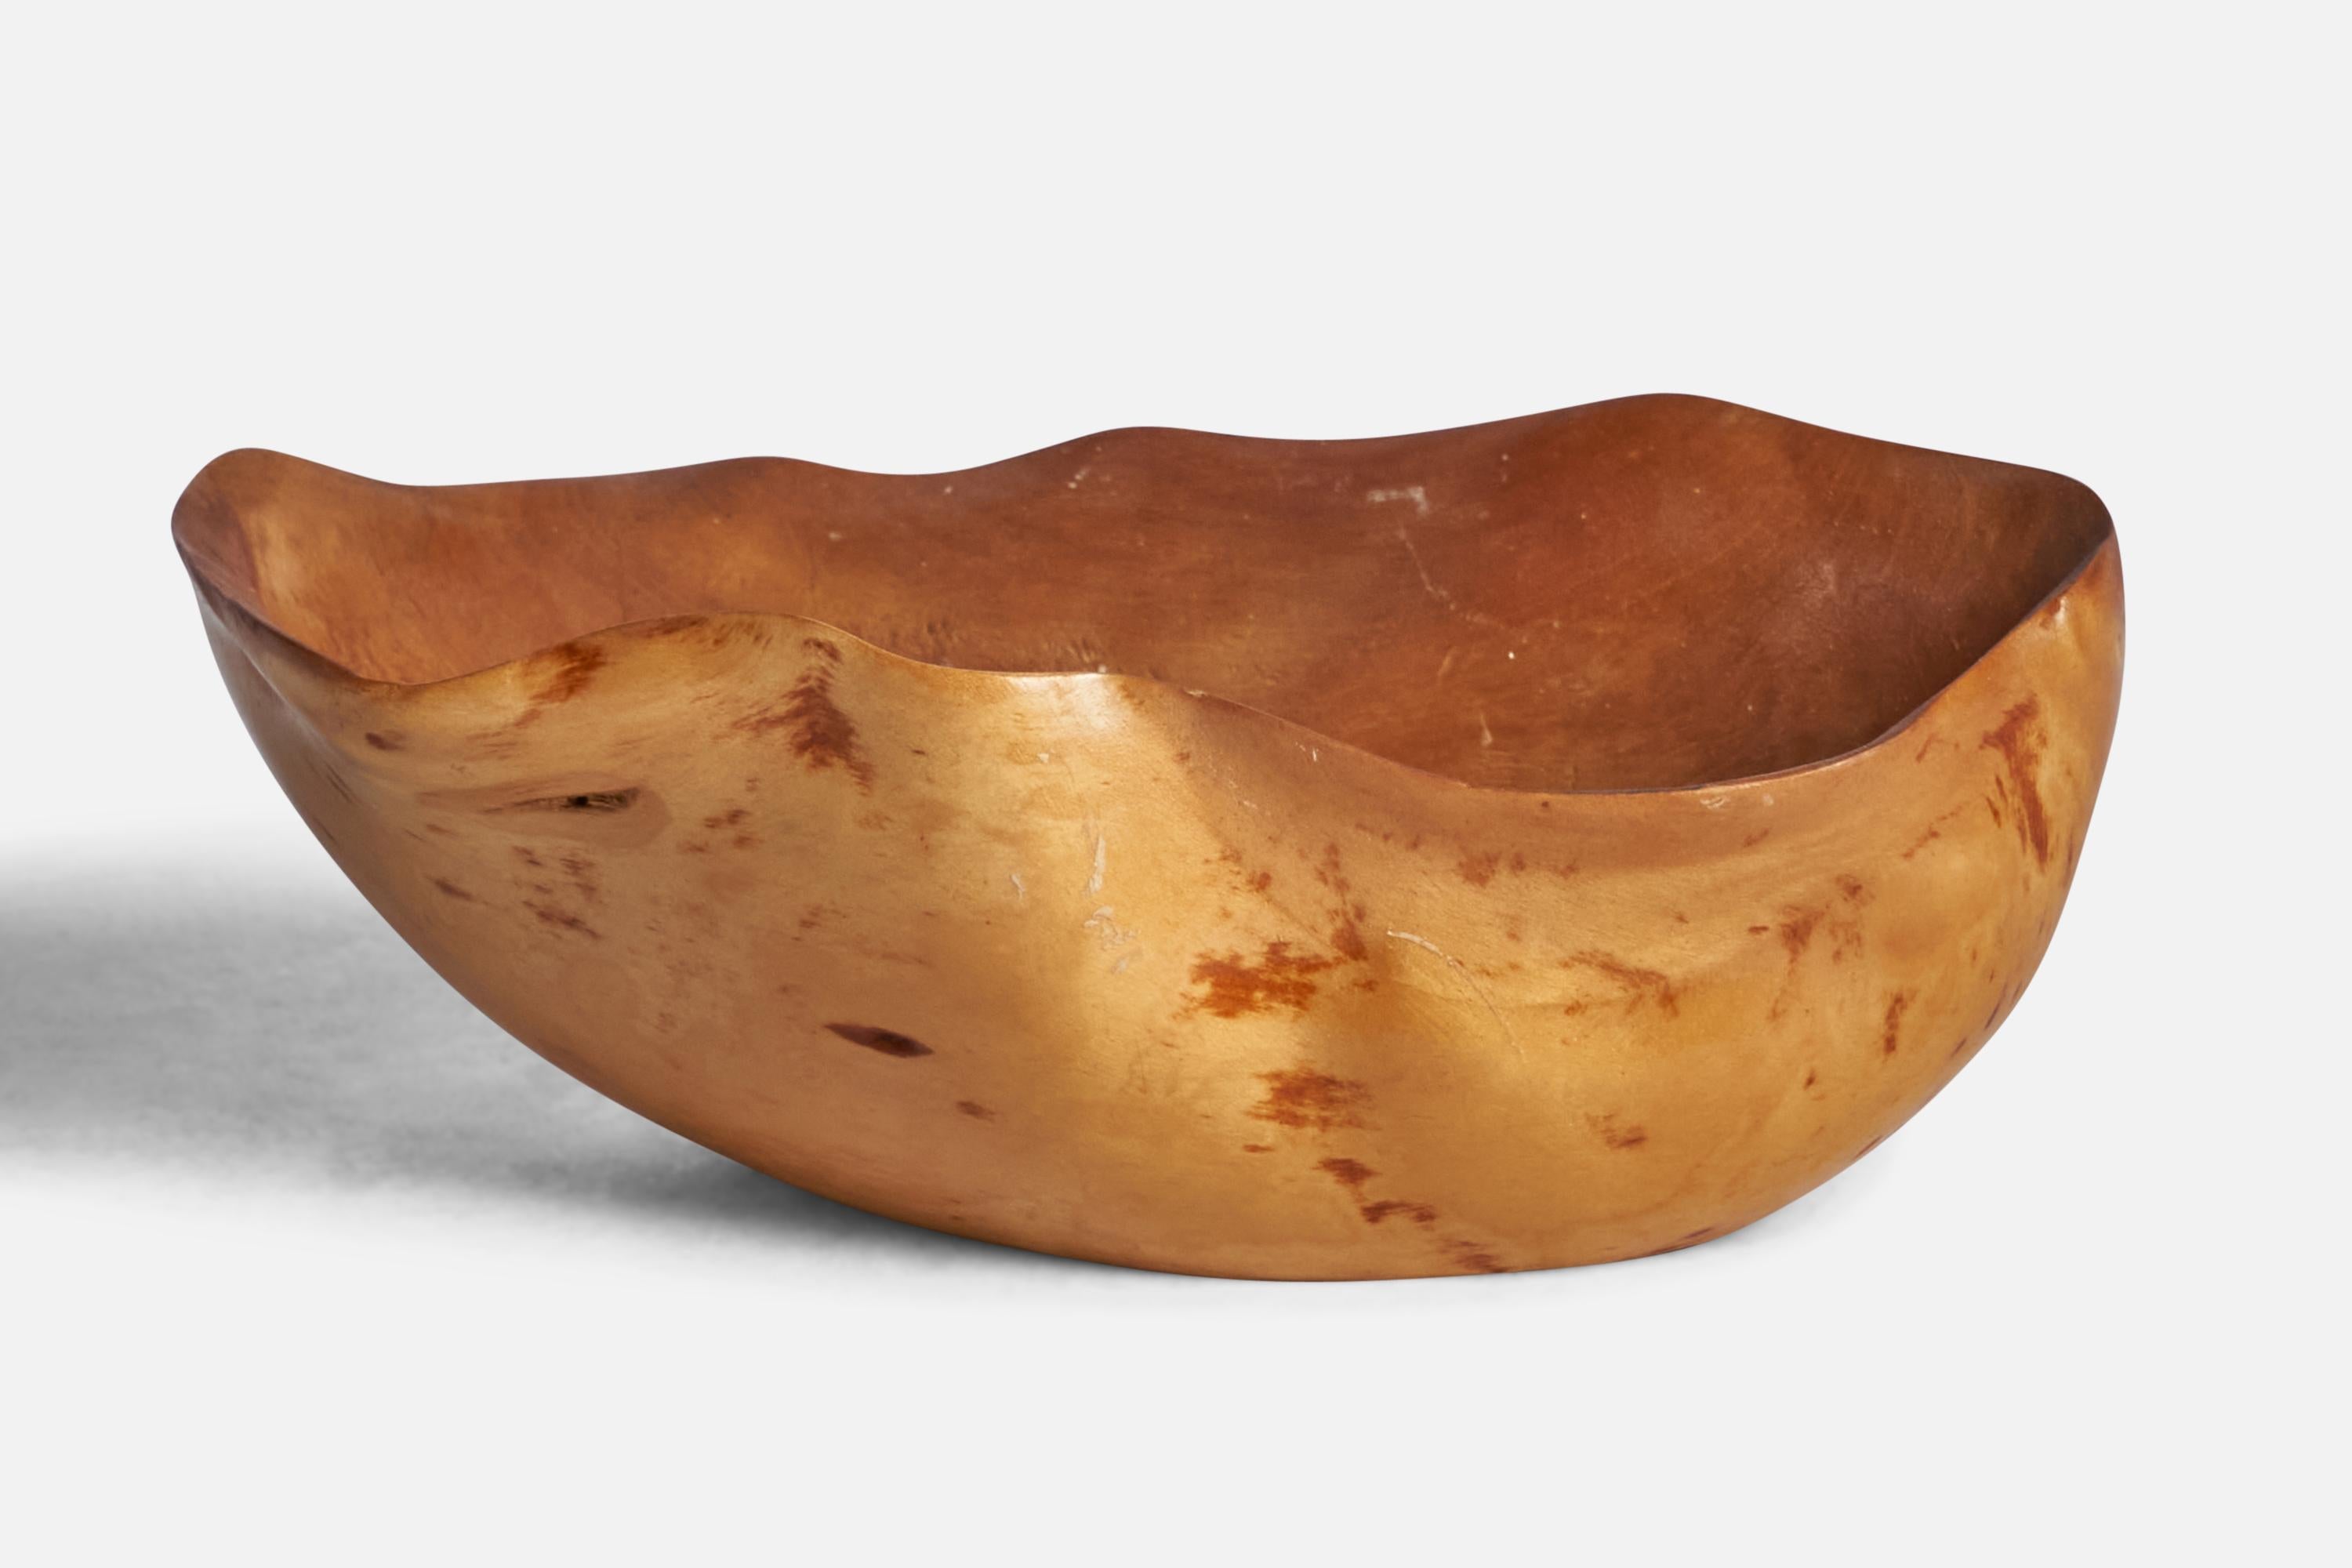 A burl wood bowl designed and produced in Sweden, 1940s.